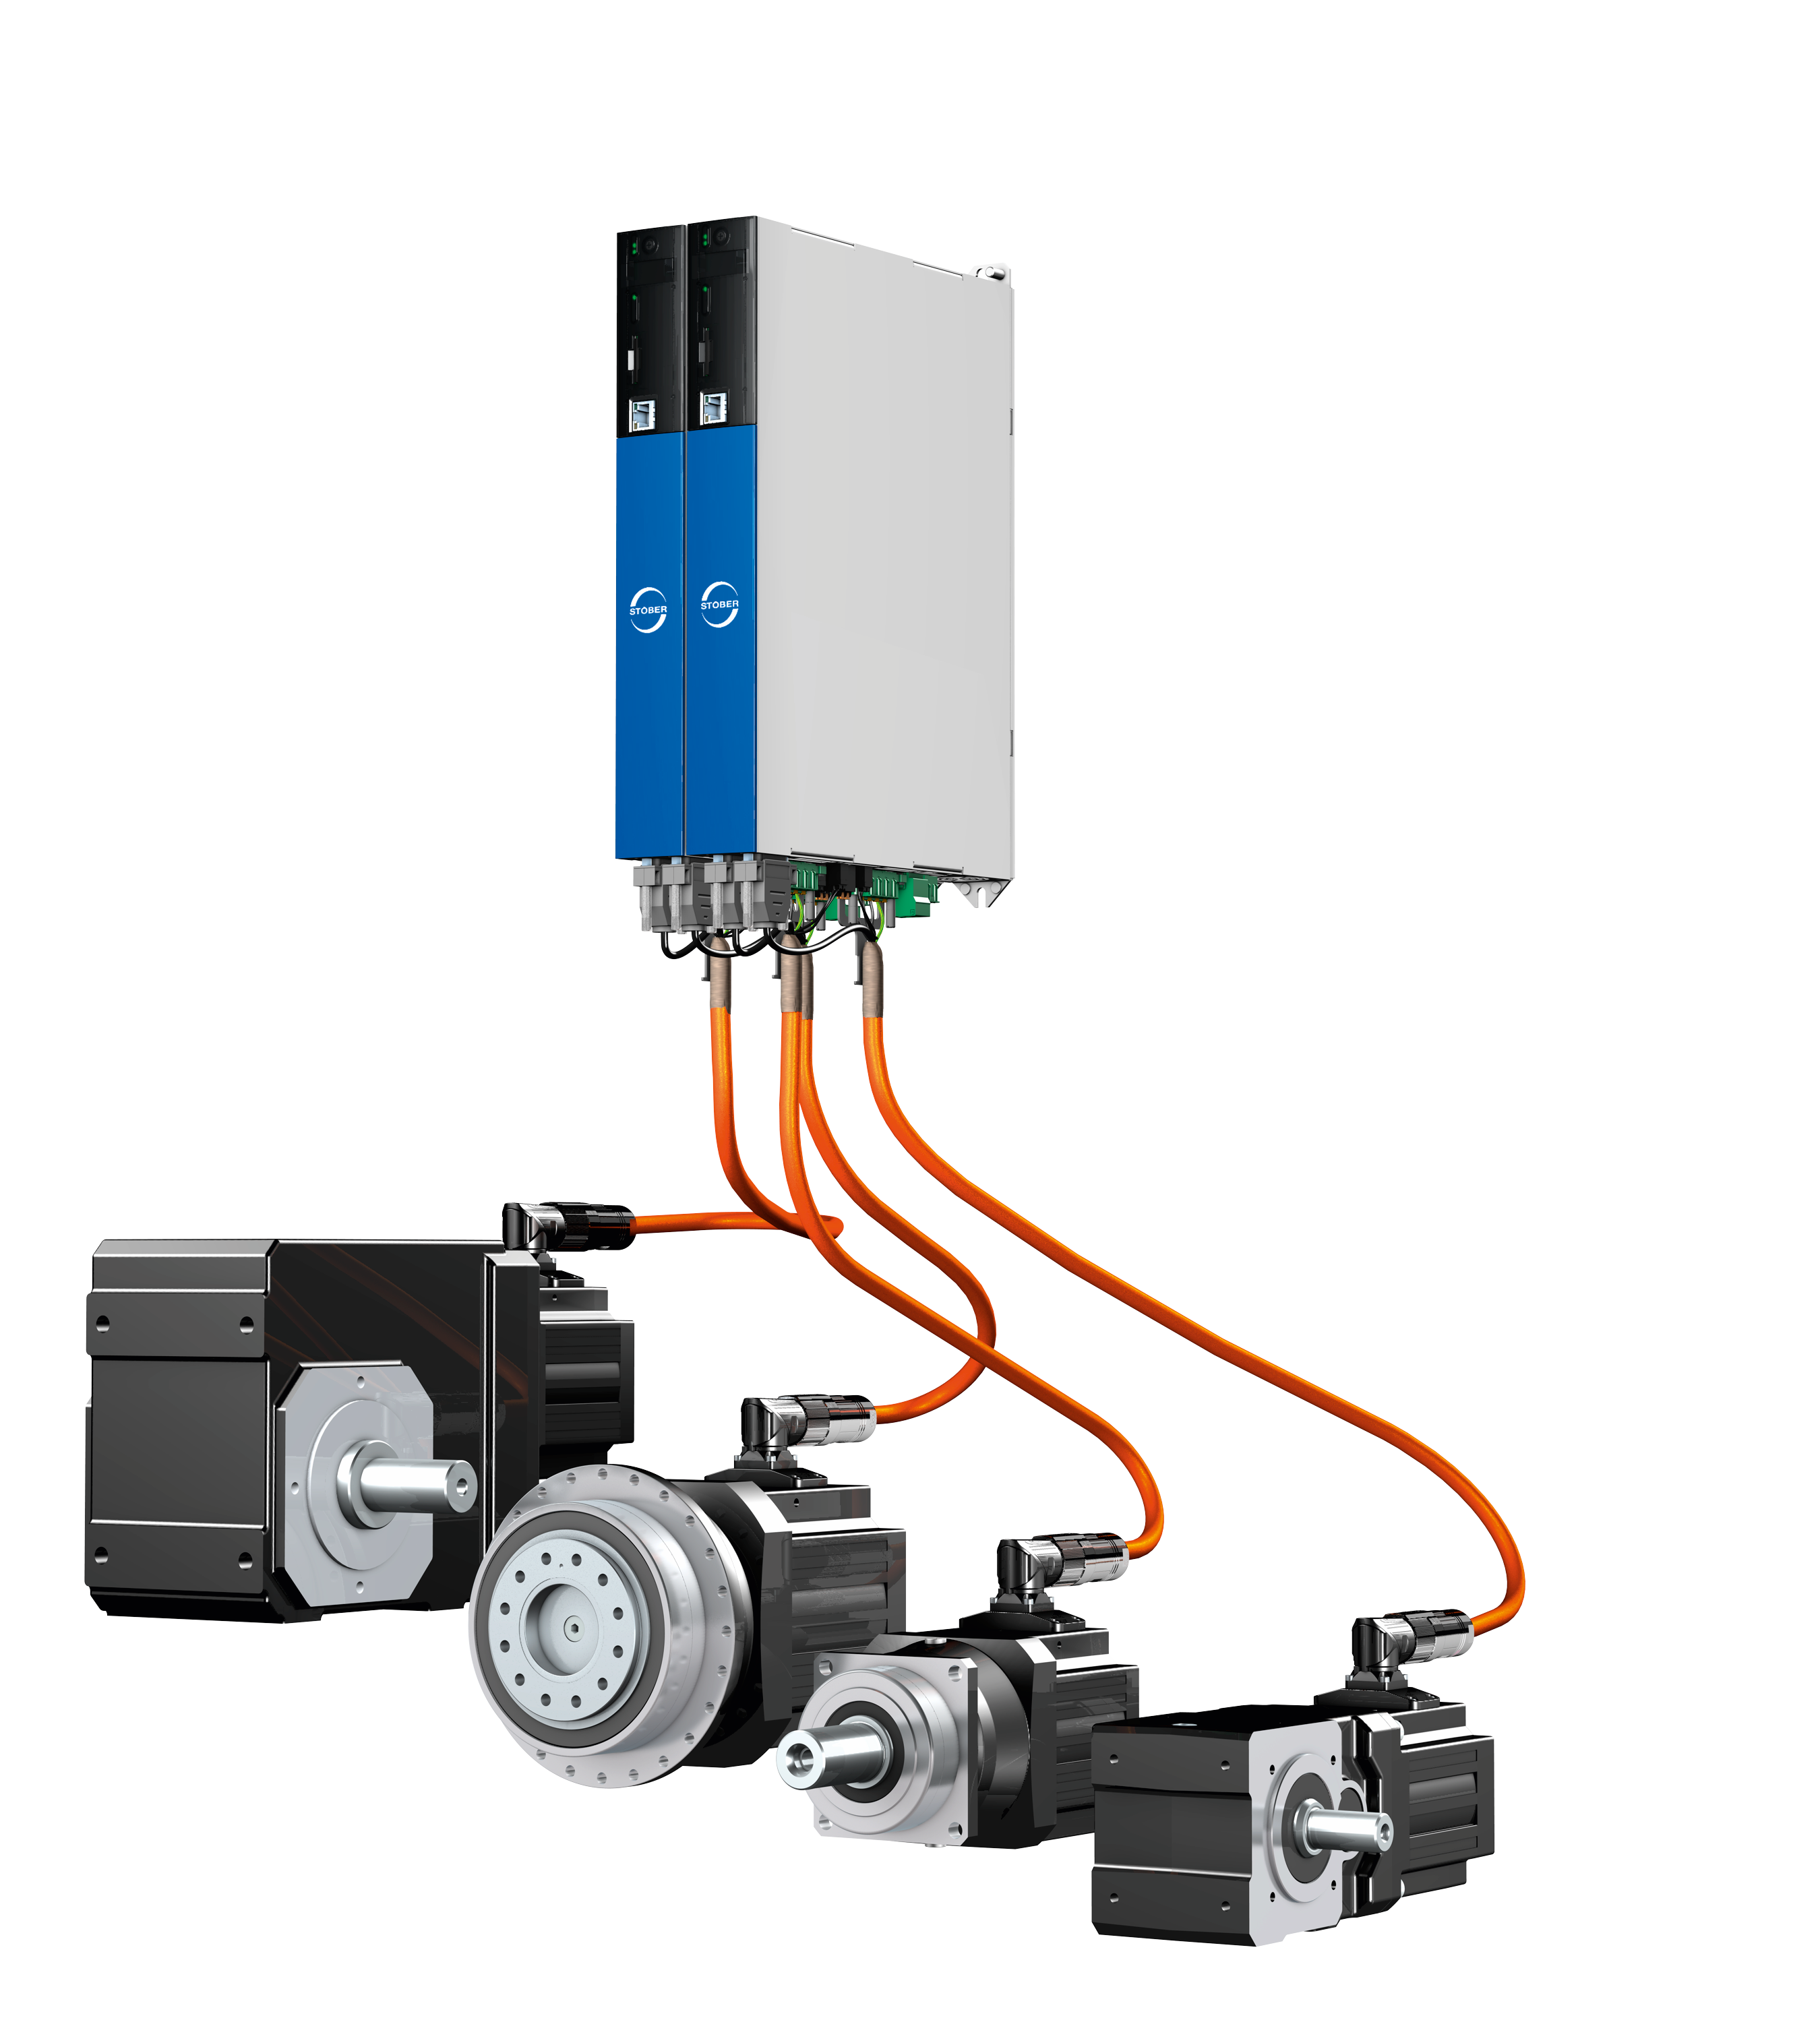 Transmit data and power up to 100 meters with the new One Cable Solution from STOBER